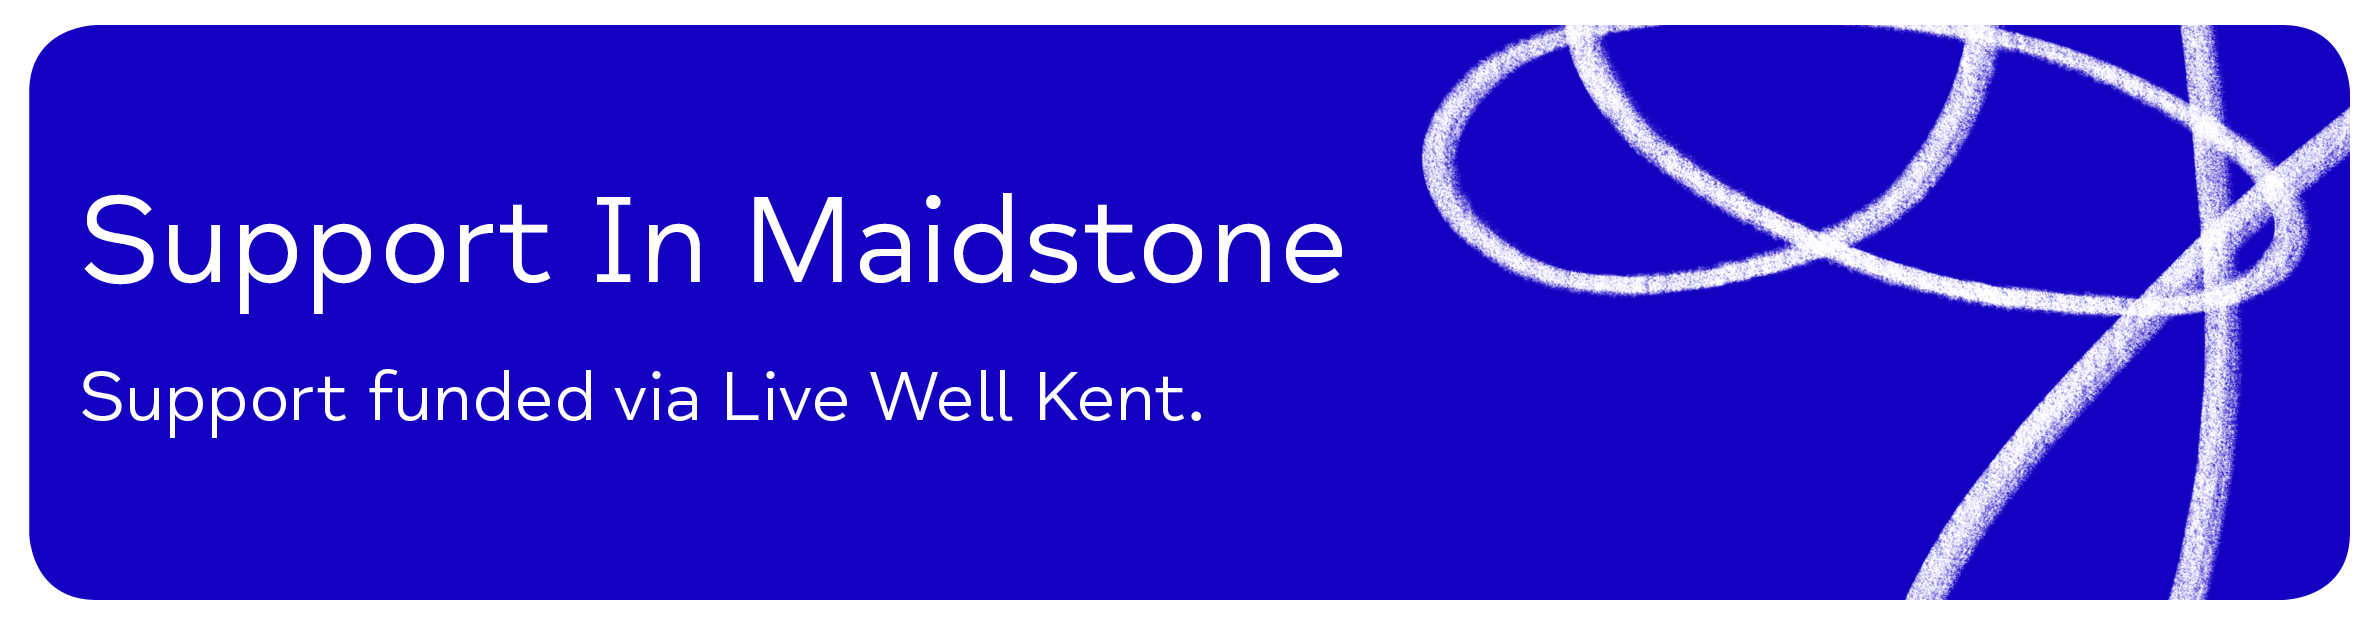 Support In Maidstone - Support Funded By Live Well Kent.